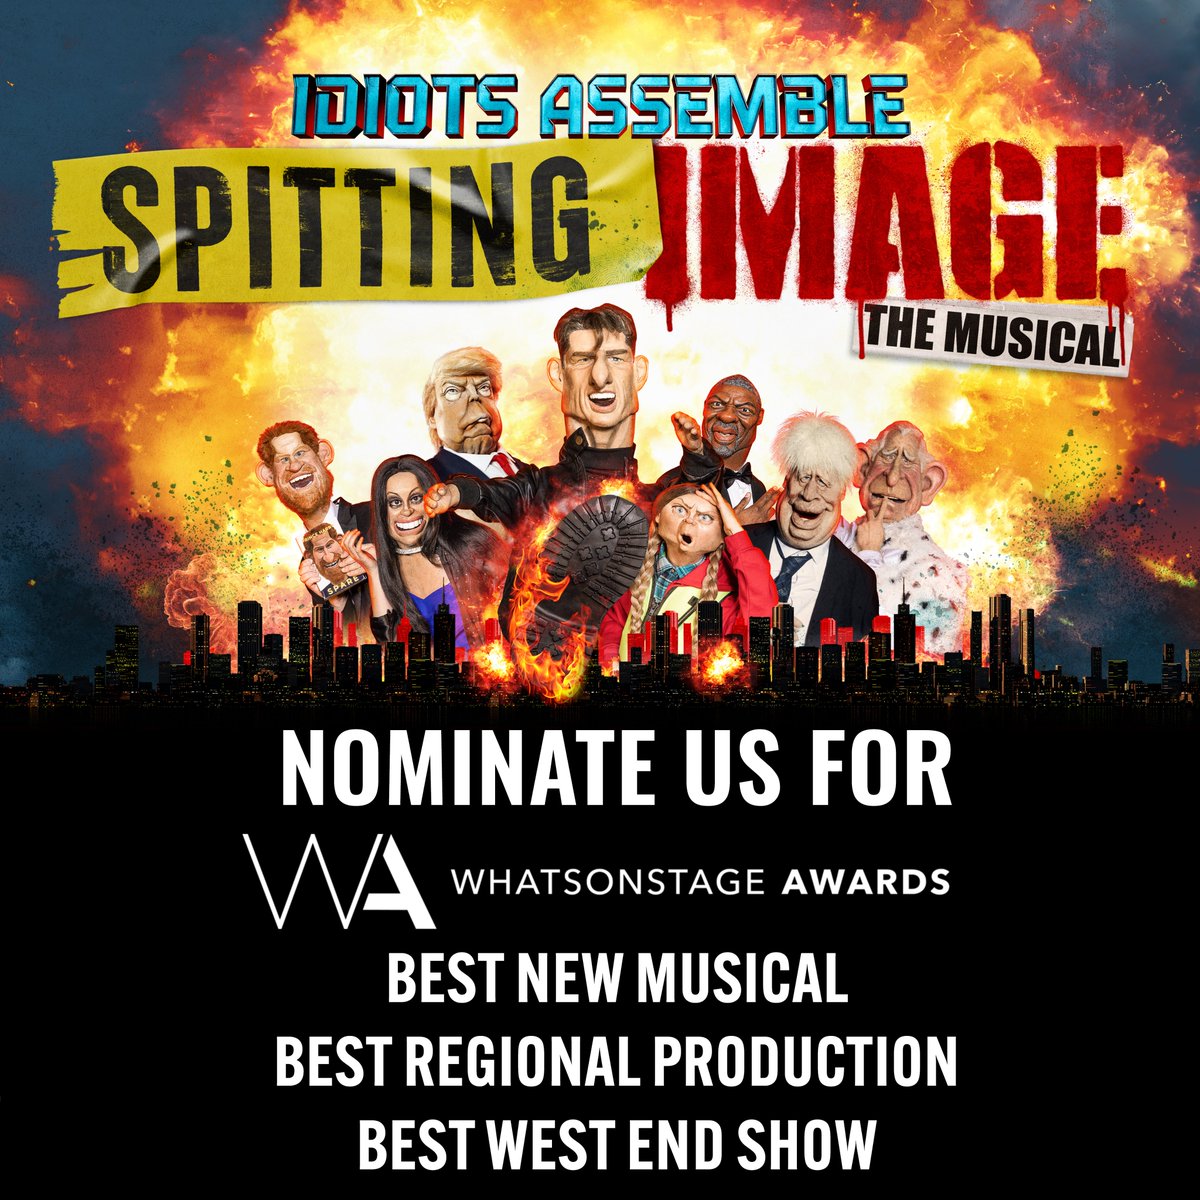 Don't STOP THE VOTES. You can nominate Spitting Image The Musical for @WhatsOnStage Awards in these three categories! Head to awards.whatsonstage.com and vote for us now!